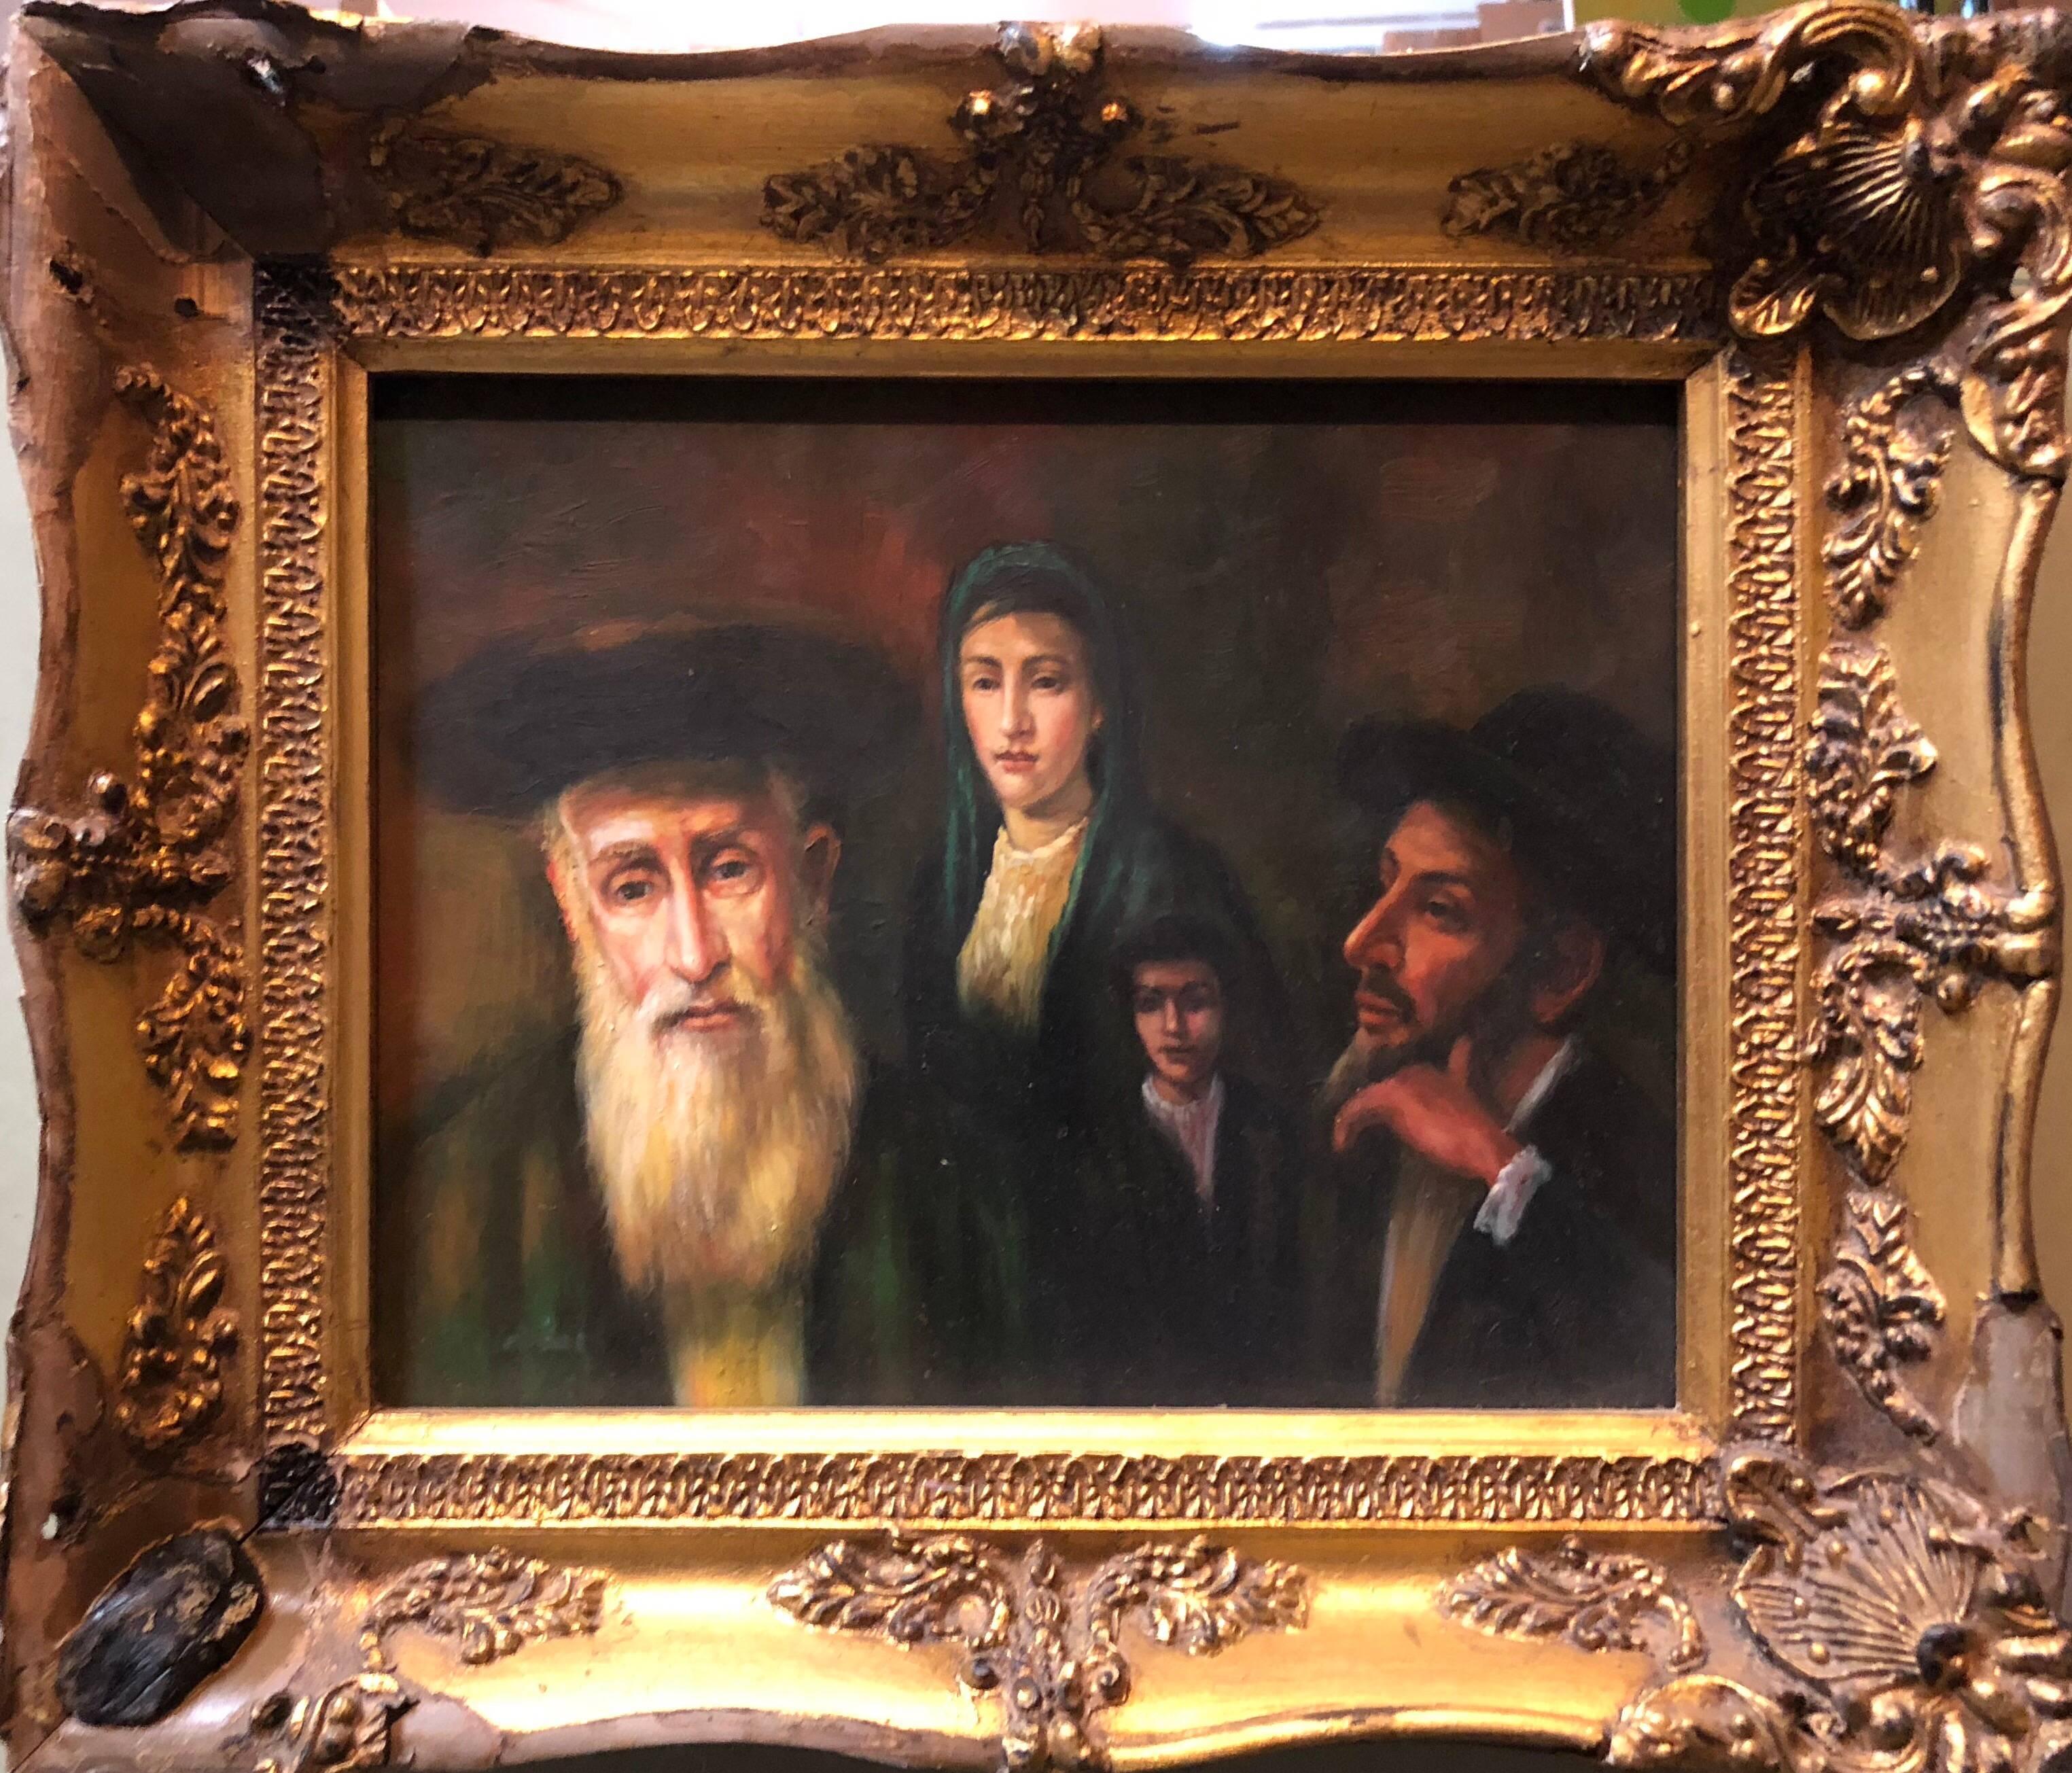  Judaica Miniature Oil Painting Jewish Family Scene - Black Figurative Painting by Unknown